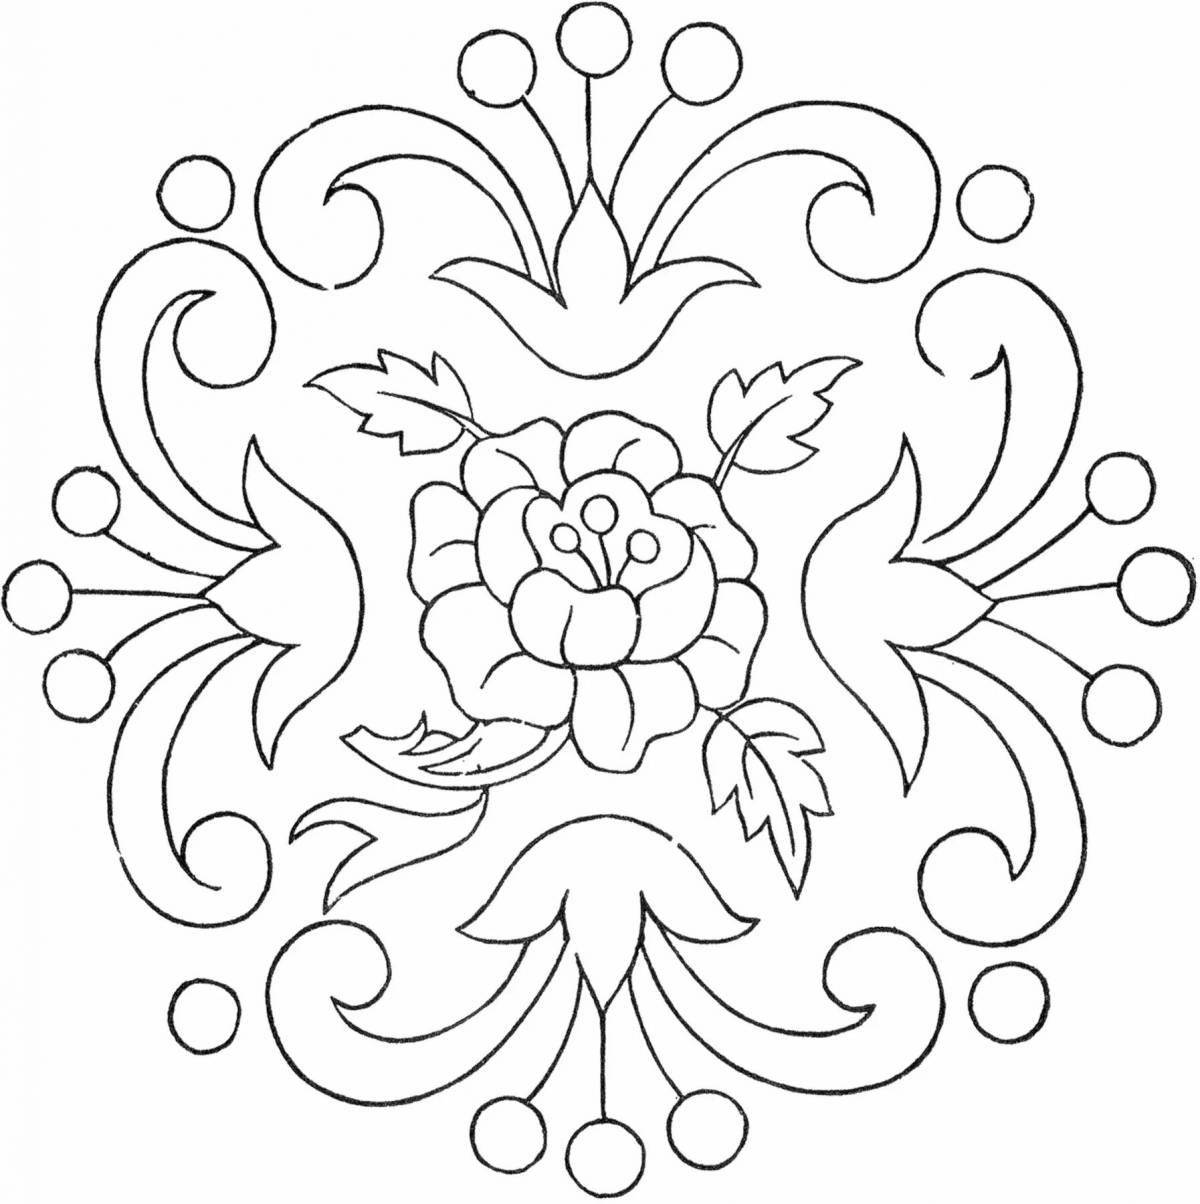 Coloring book shining flower ornament